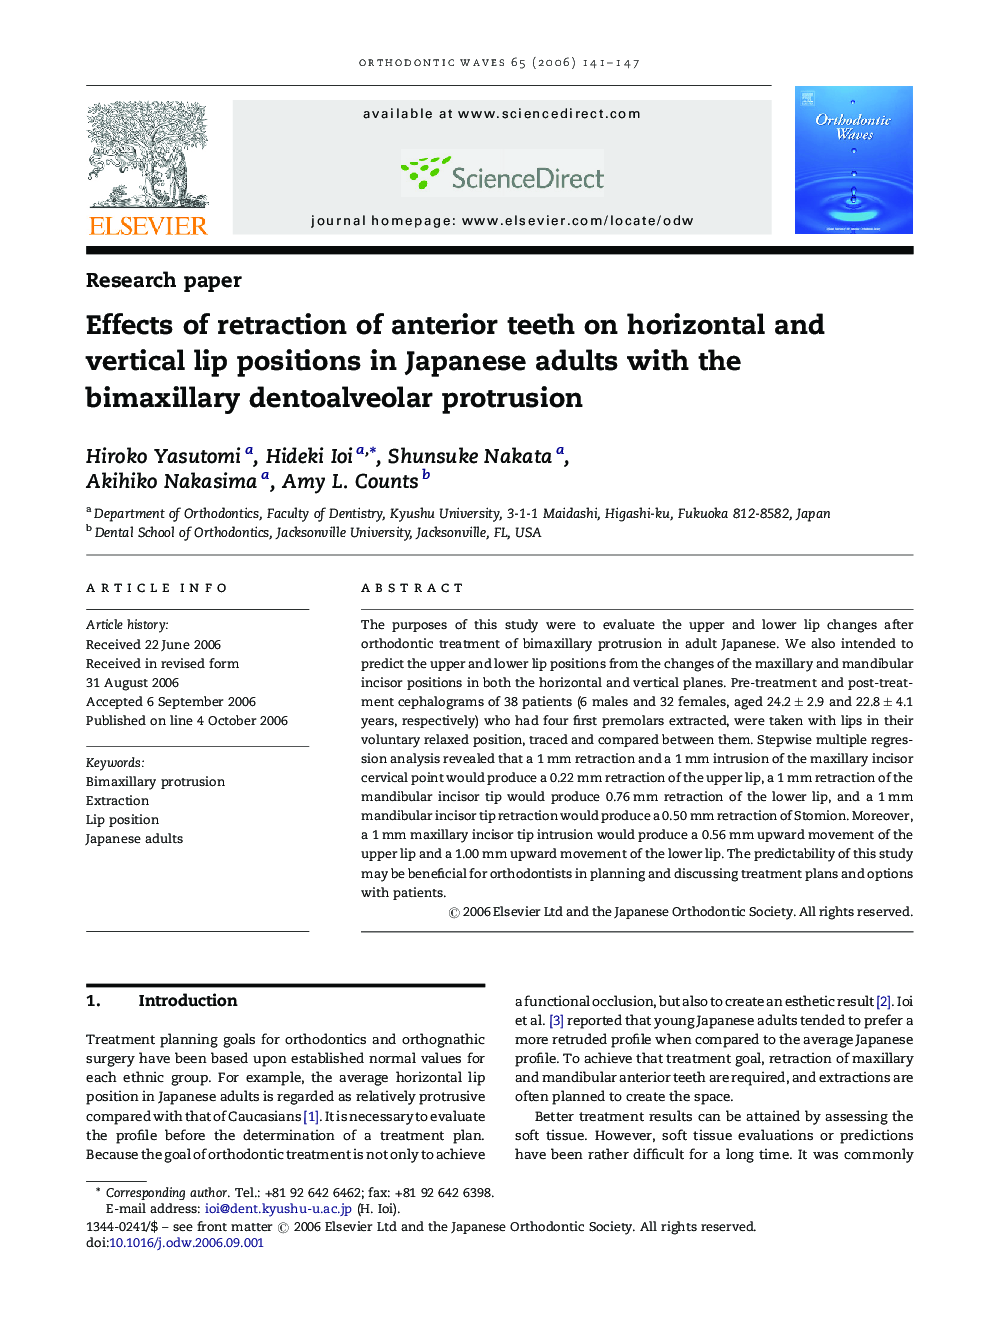 Effects of retraction of anterior teeth on horizontal and vertical lip positions in Japanese adults with the bimaxillary dentoalveolar protrusion